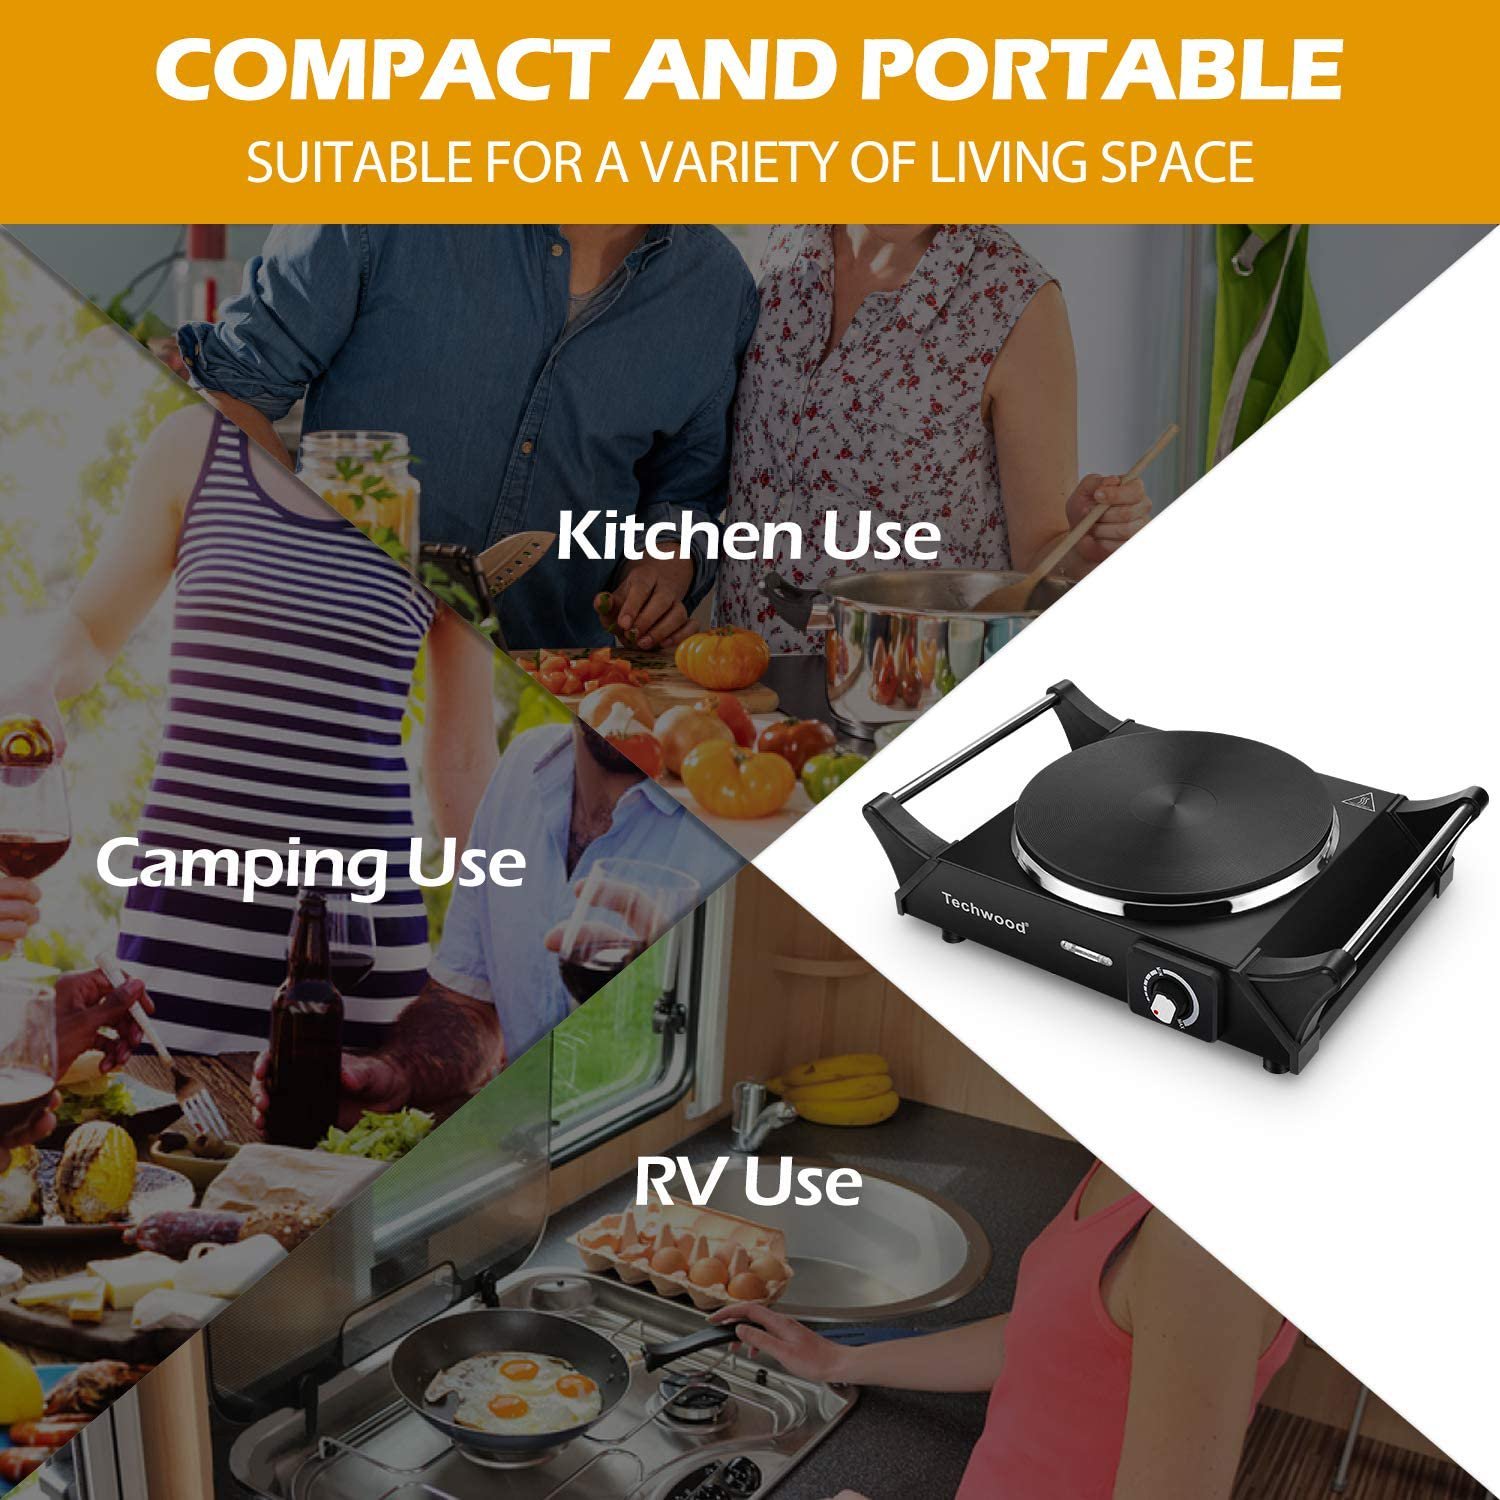 https://themarketdepot.com/wp-content/uploads/2023/01/Techwood-Hot-Plate-Portable-Electric-Stove-1500W-Countertop-Single-Burner-with-Adjustable-Temperature-Stay-Cool-Handles-7.5-Cooktop-for-Dorm-OfficeHomeCamp-Compatible-for-All-Cookwares-3.jpeg